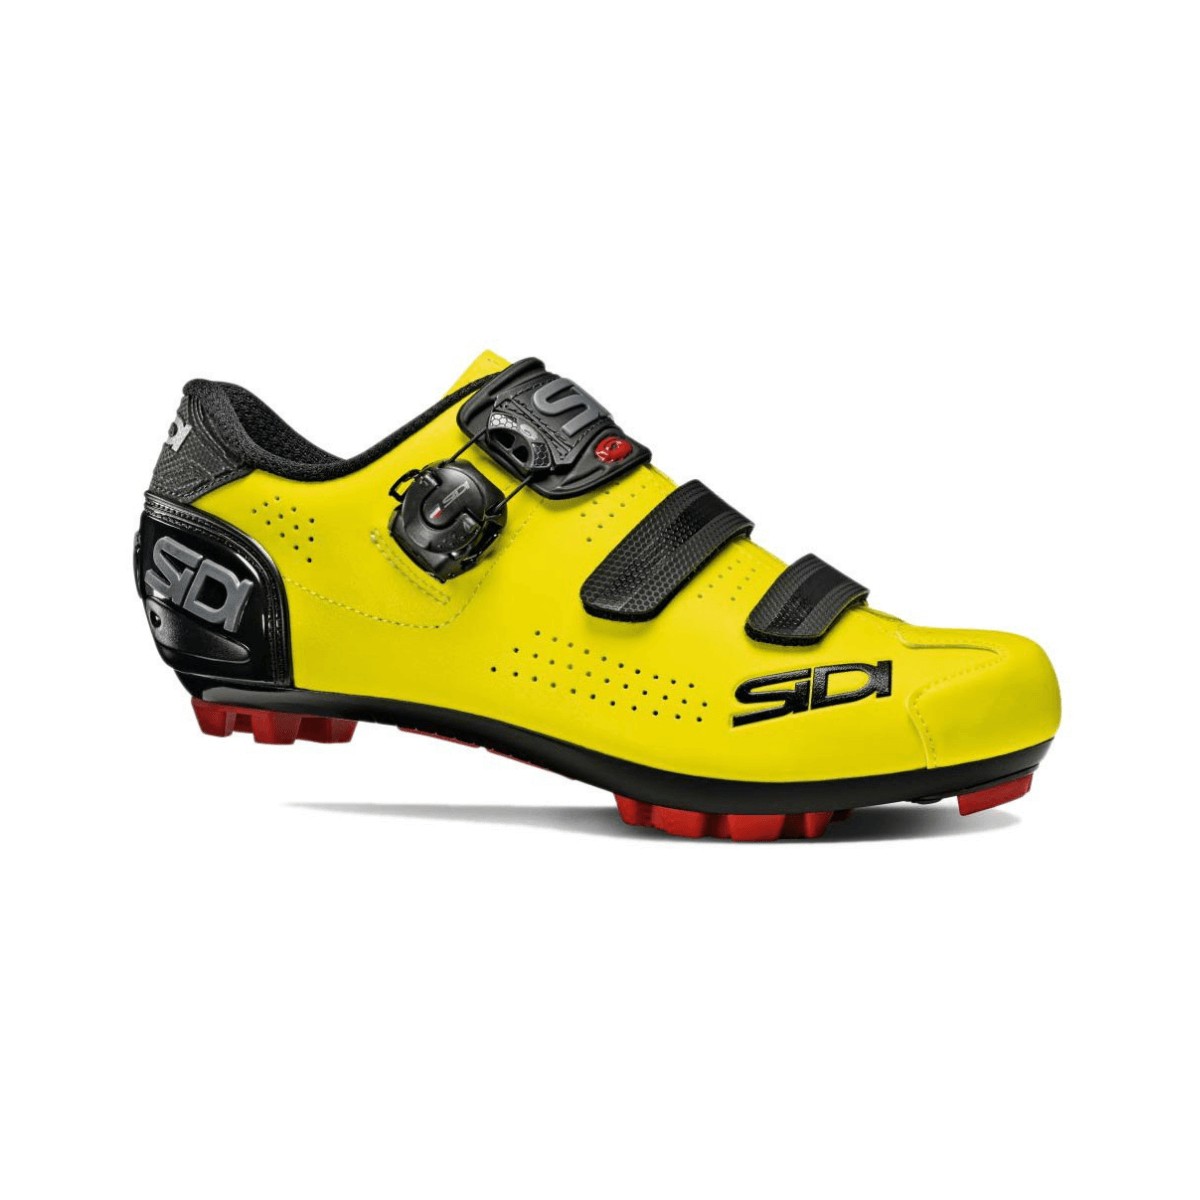 Sidi MTB Trace 2 Shoes Yellow Fluo, Size 41 - EUR